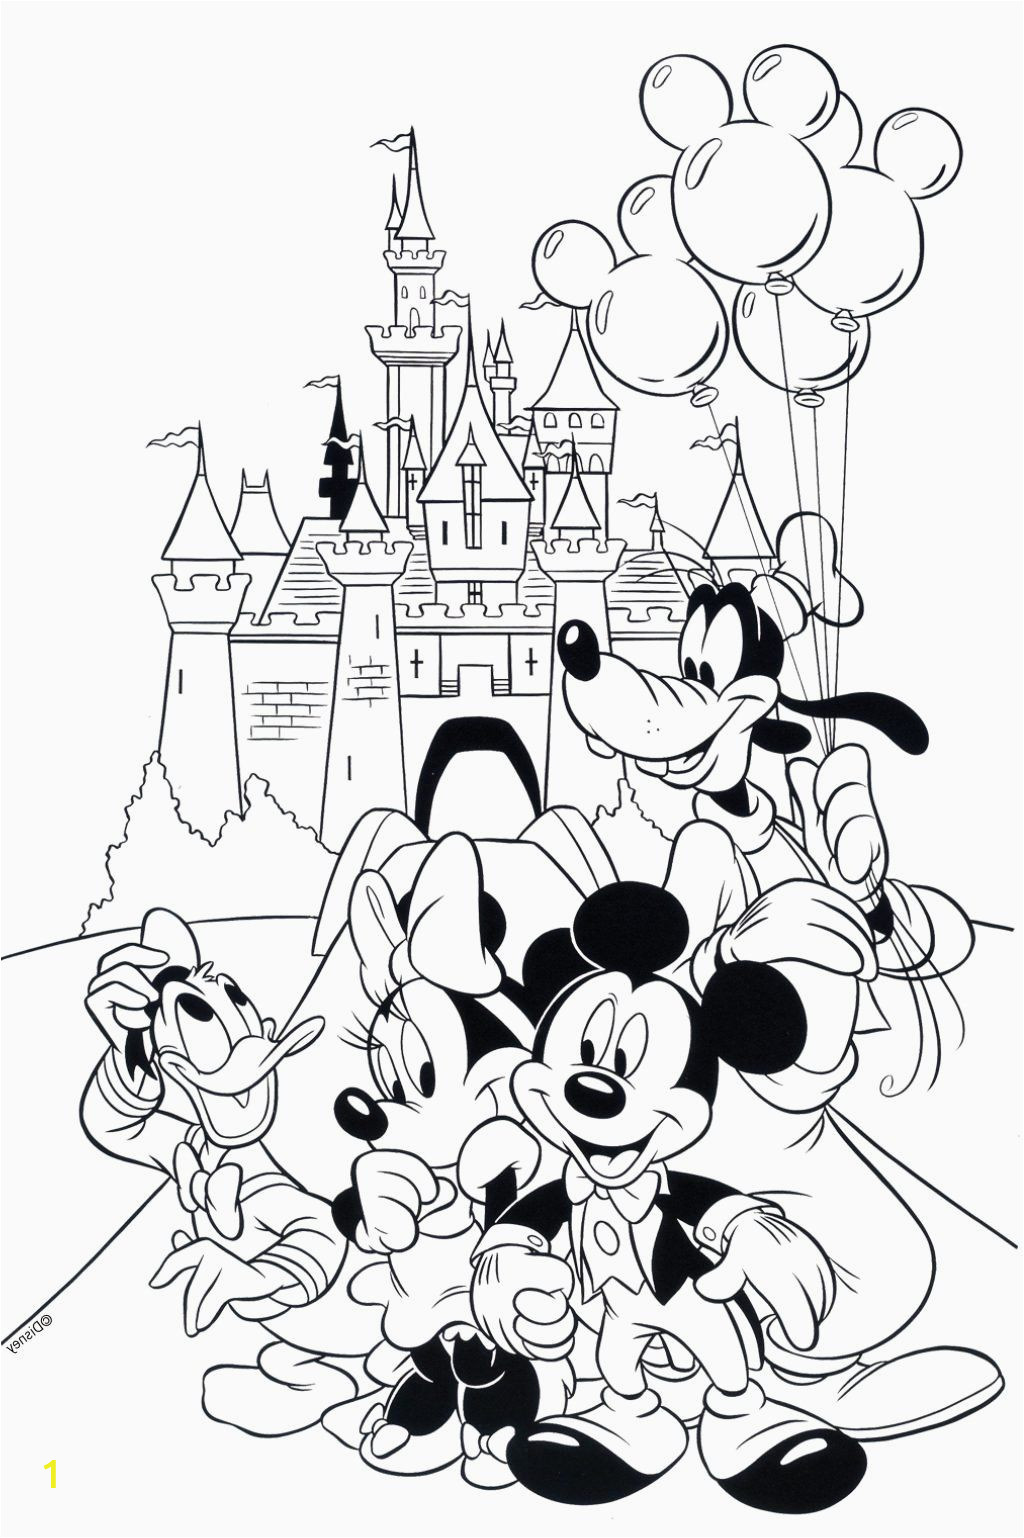 Disney World Rides Coloring Pages Inspirational Lovely Magic Kingdom Castle Coloring Pages